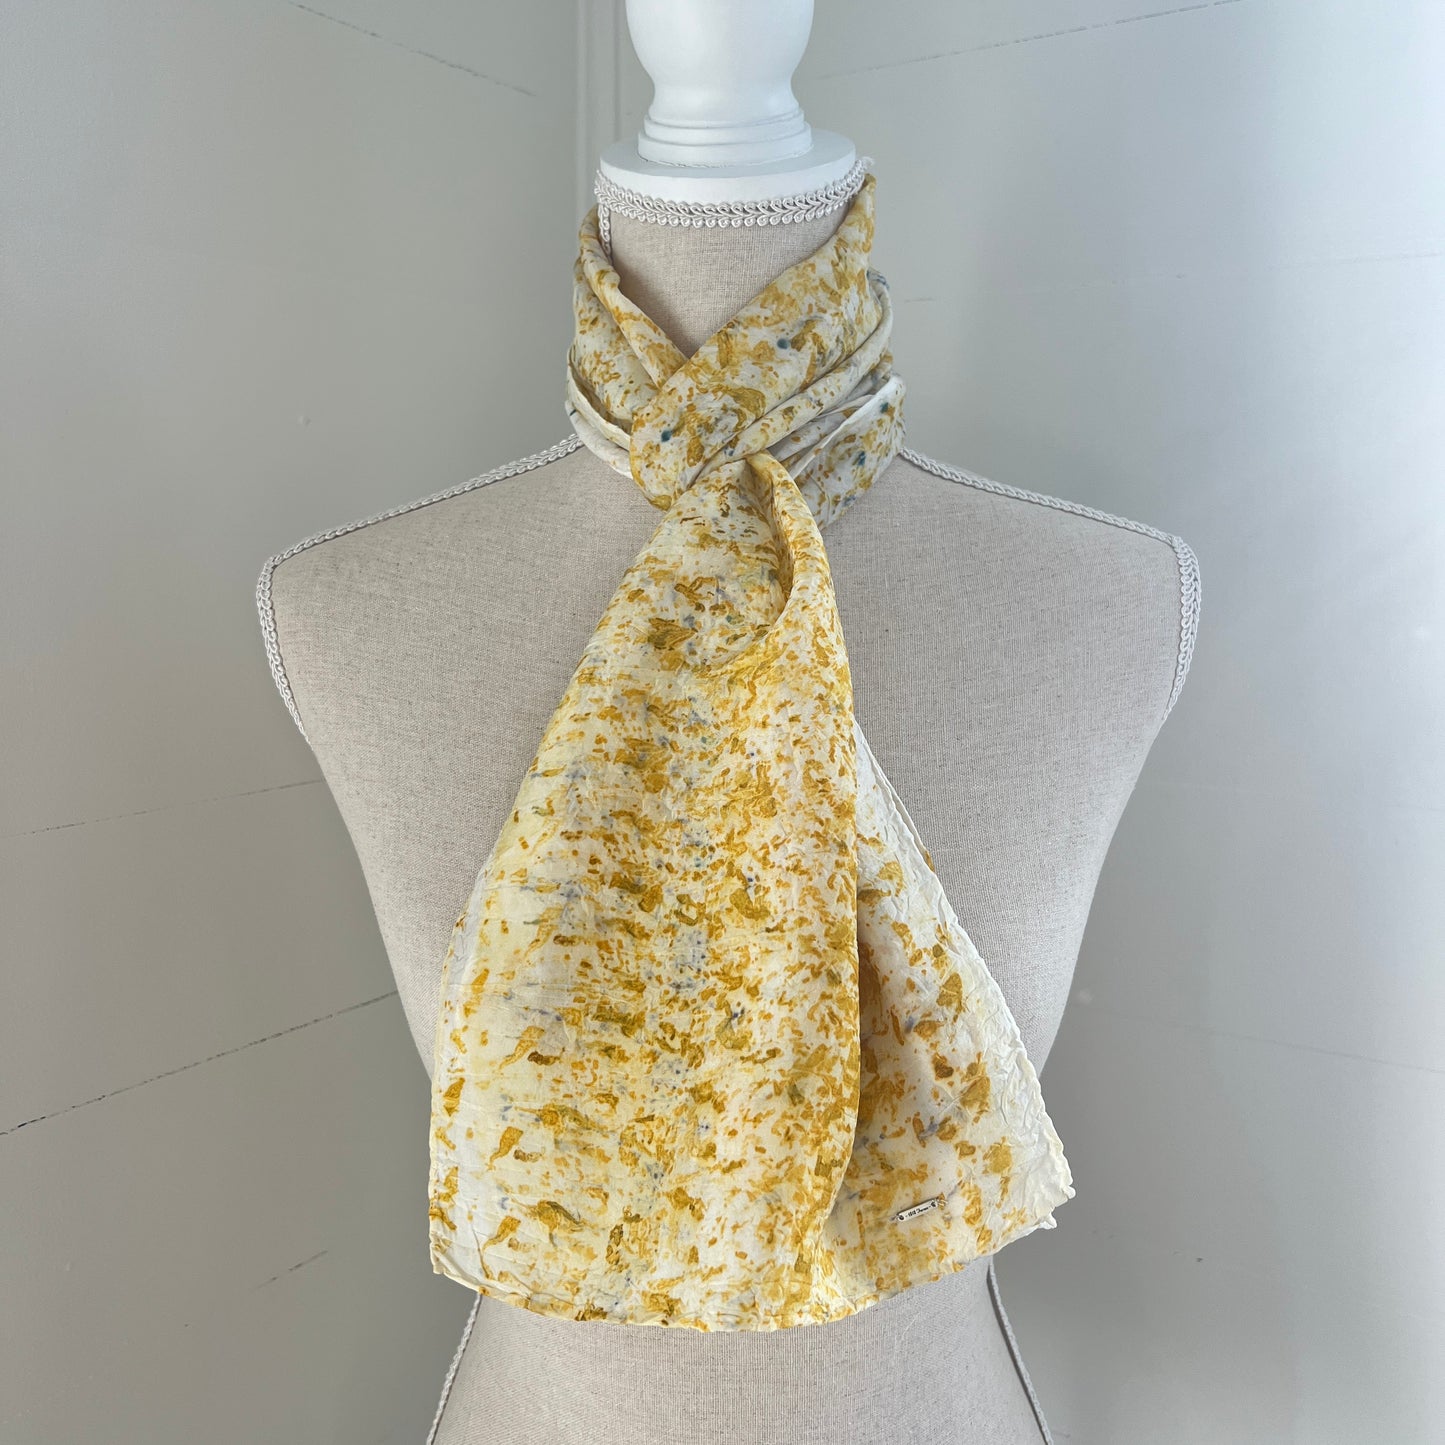 "Holly" Marigold/Hint of Bachelor Buttons Scarf 1818 Farms   